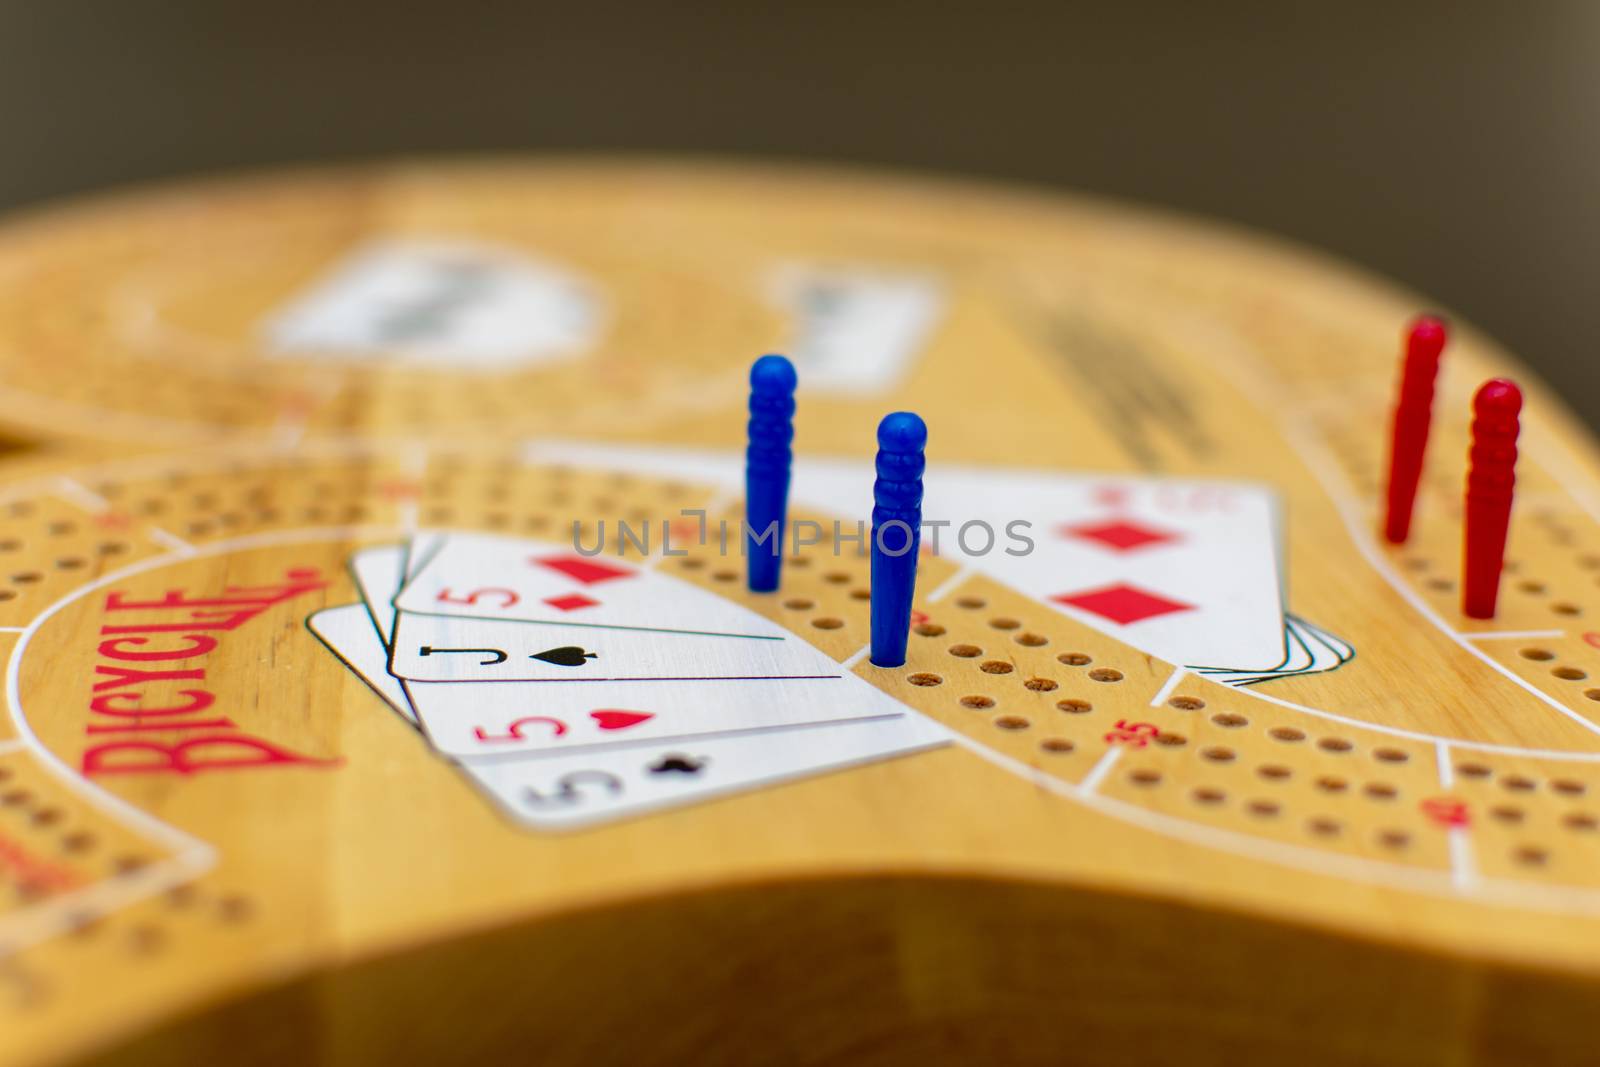 RAK, RAK/UAE - 4/20/2019: "Cribbage card game and board up close looking at the blue and red pegs."